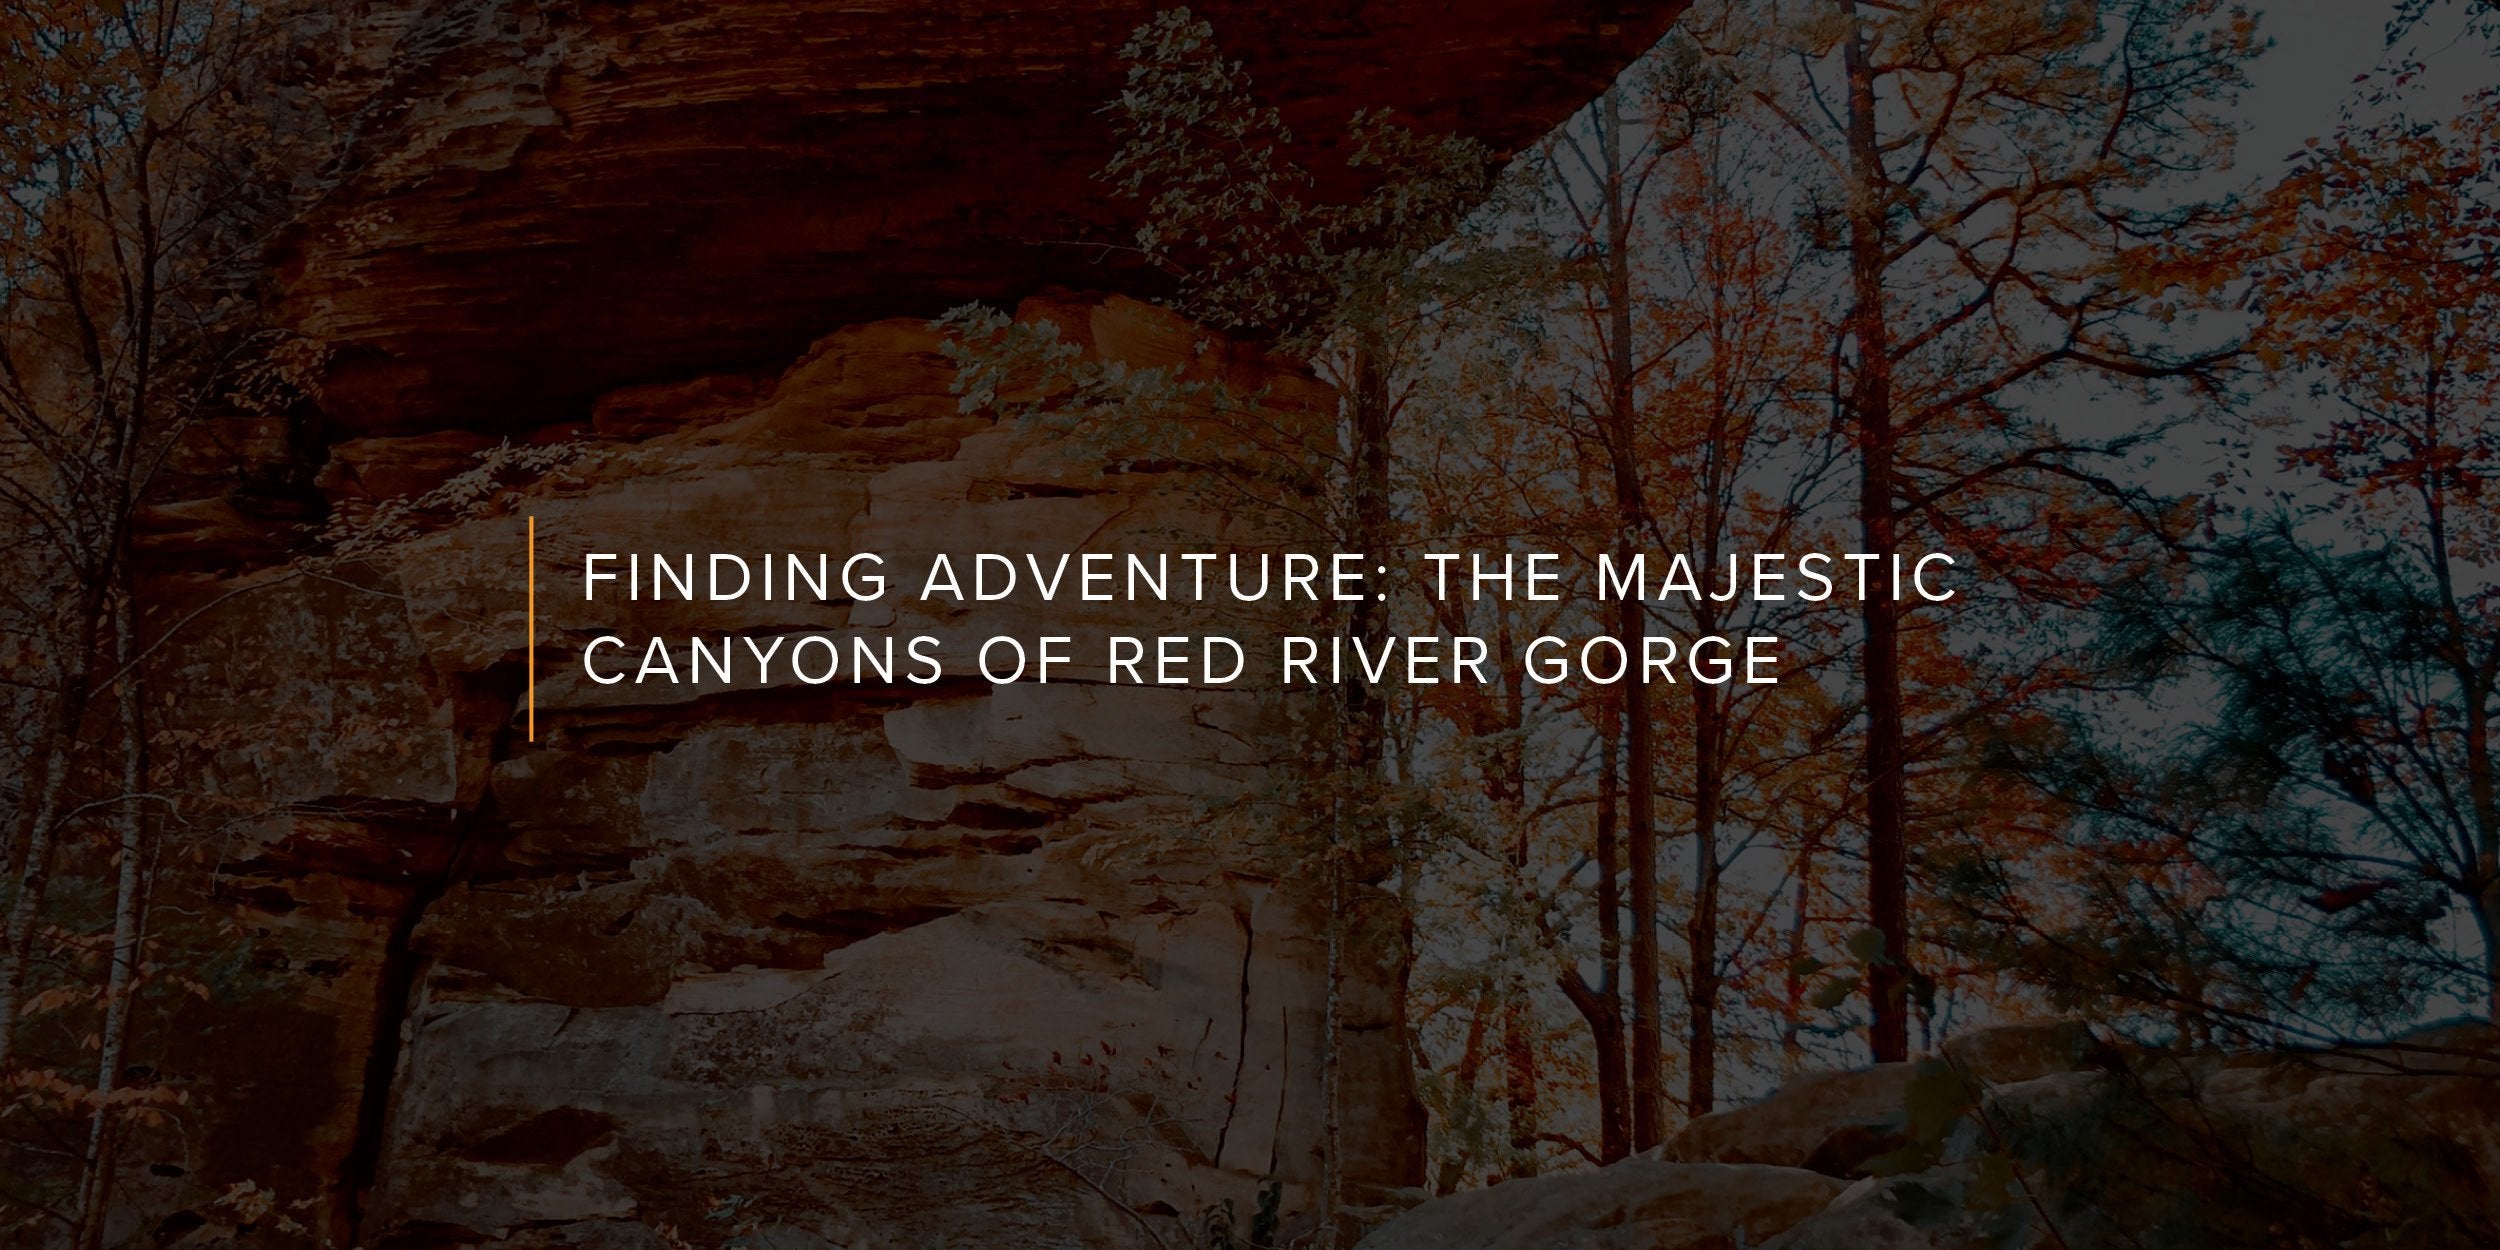 Finding Adventure: The Majestic Canyons of Red River Gorge